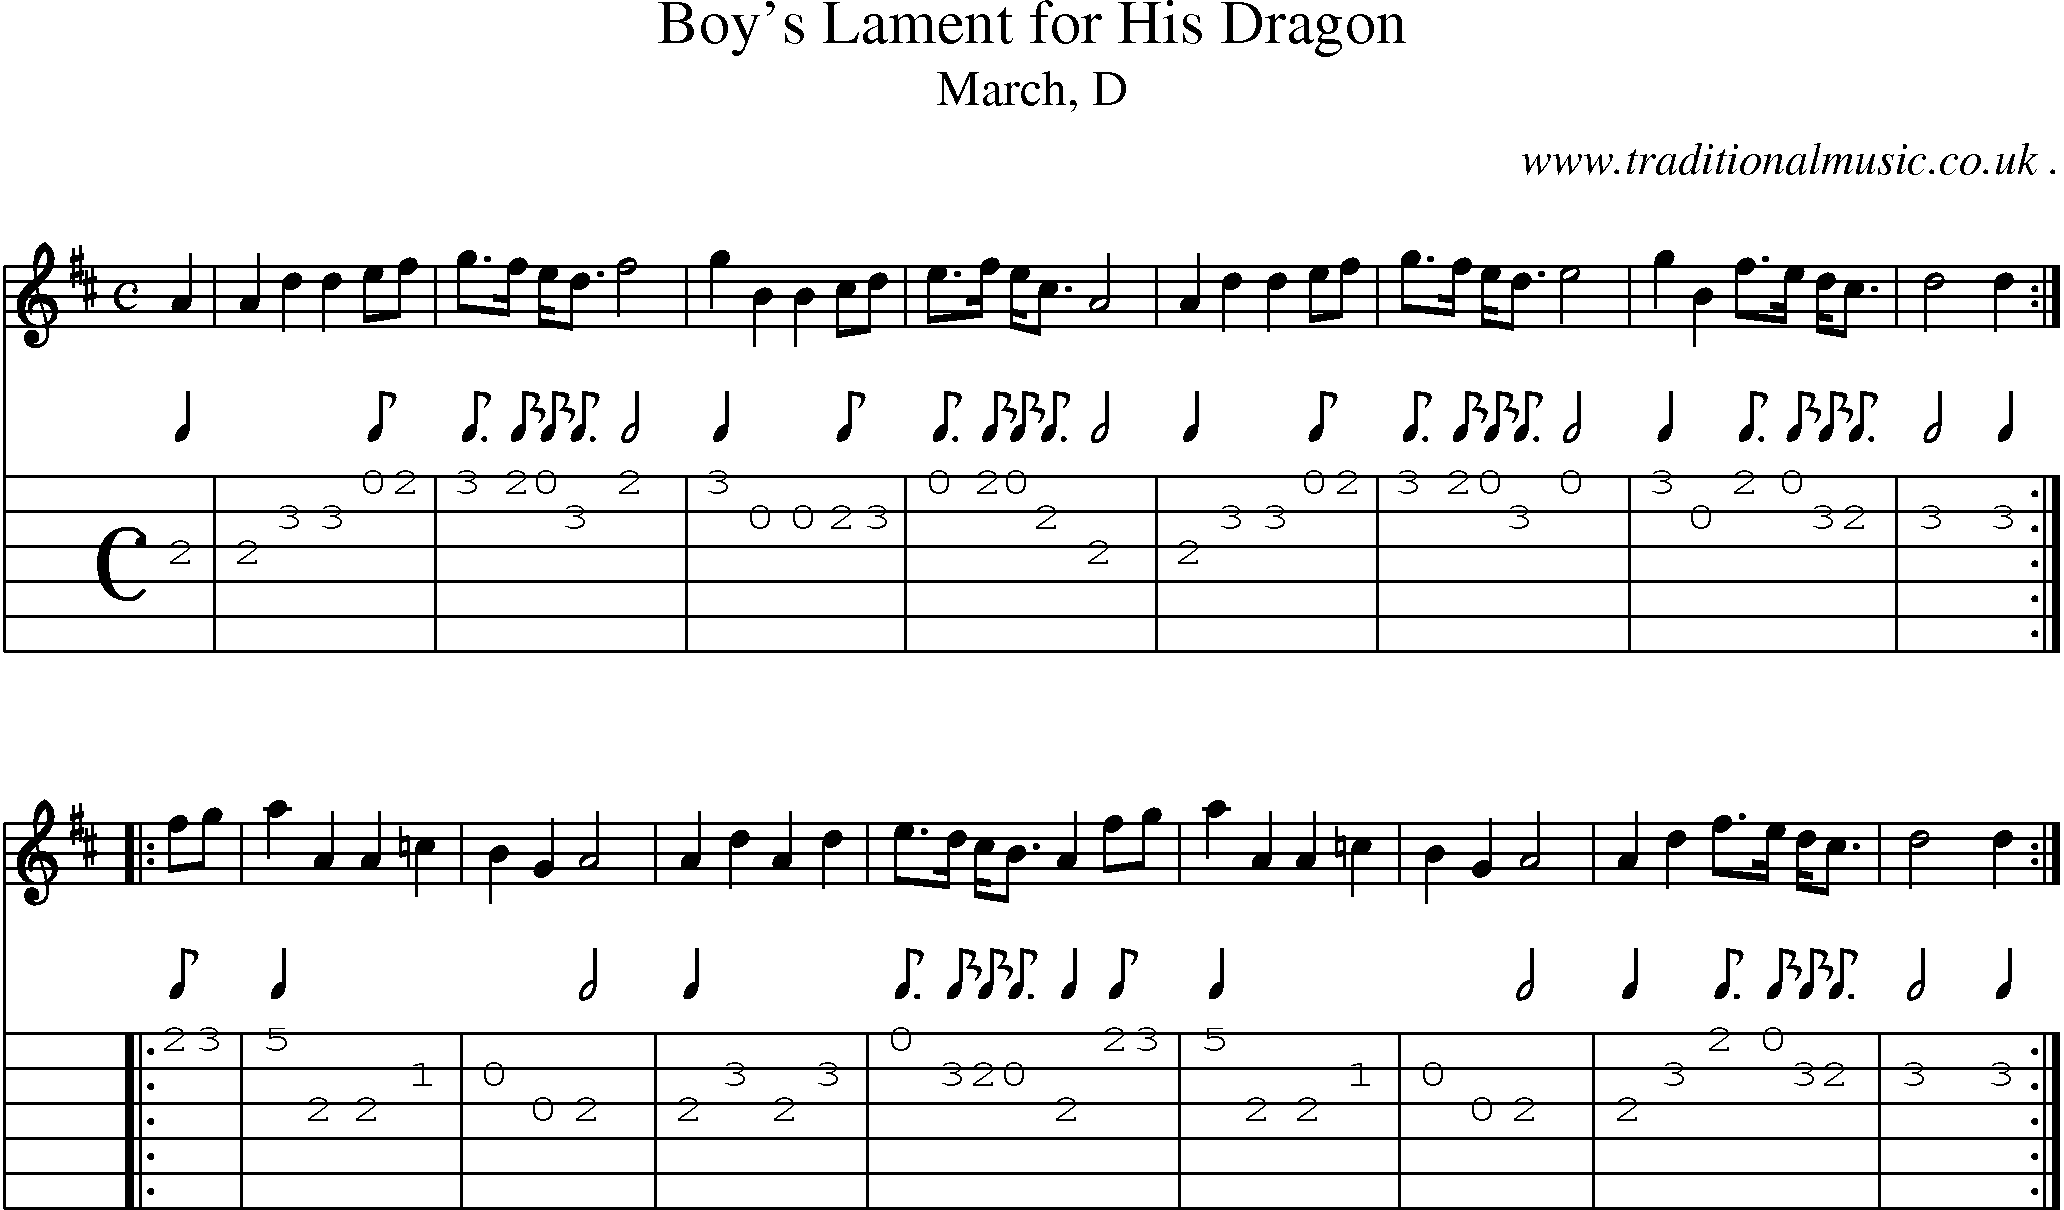 Sheet-music  score, Chords and Guitar Tabs for Boys Lament For His Dragon